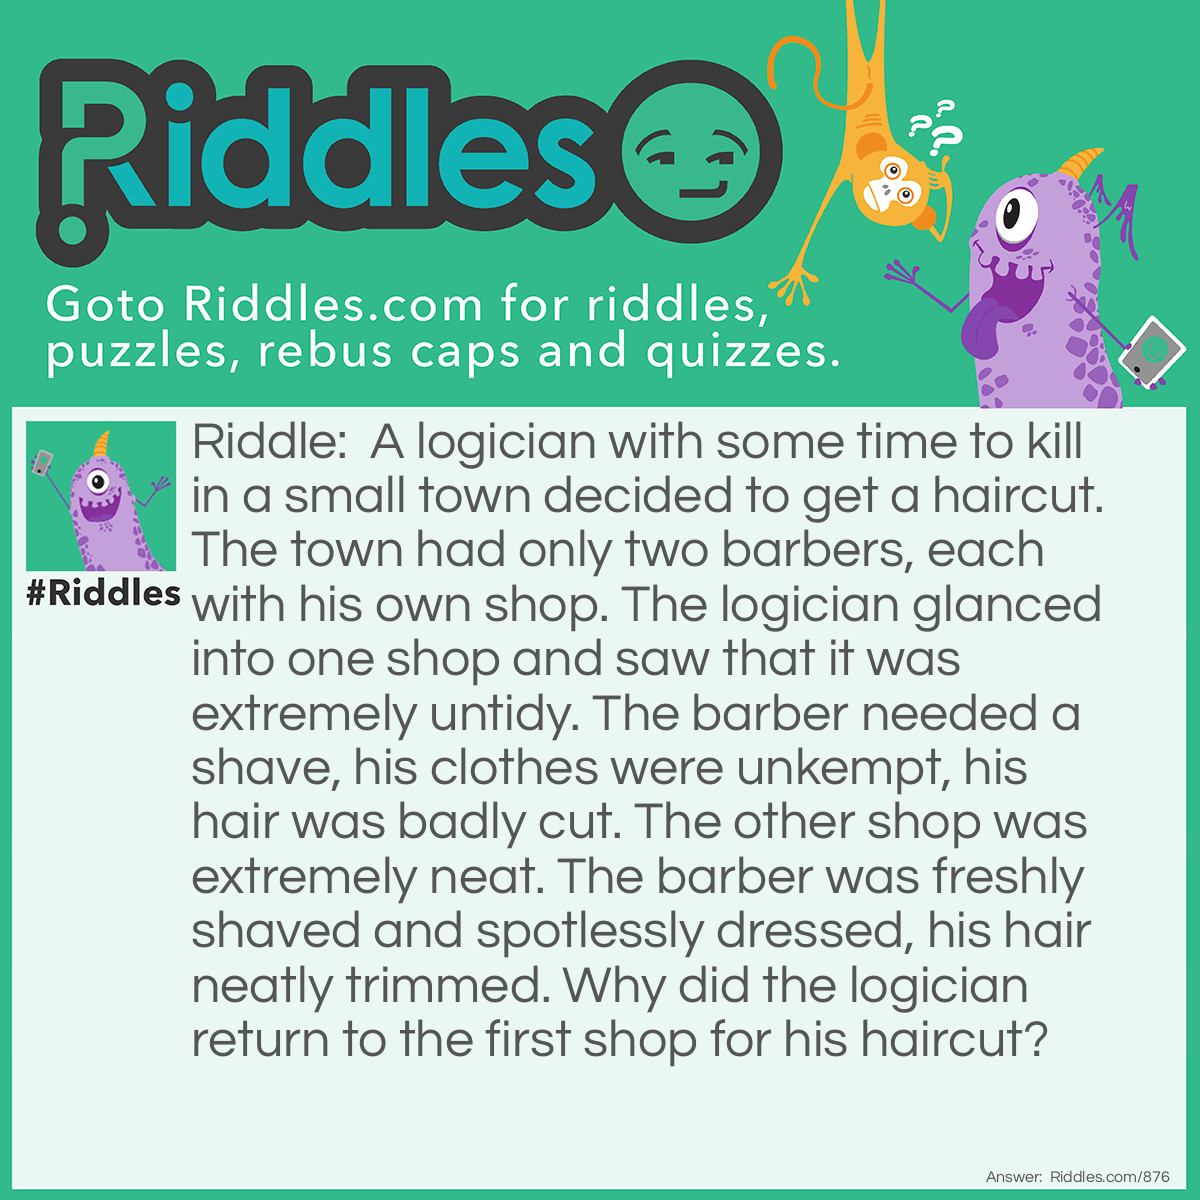 Riddle: A logician with some time to kill in a small town decided to get a haircut. The town had only two barbers, each with his own shop. The logician glanced into one shop and saw that it was extremely untidy. The barber needed a shave, his clothes were unkempt, and his hair was badly cut. The other shop was extremely neat. The barber was freshly shaved and spotlessly dressed, his hair neatly trimmed. Why did the logician return to the first shop for his haircut? Answer: Each barber must have cut the other's hair. The logician picked the barber who had given his rival the better haircut.